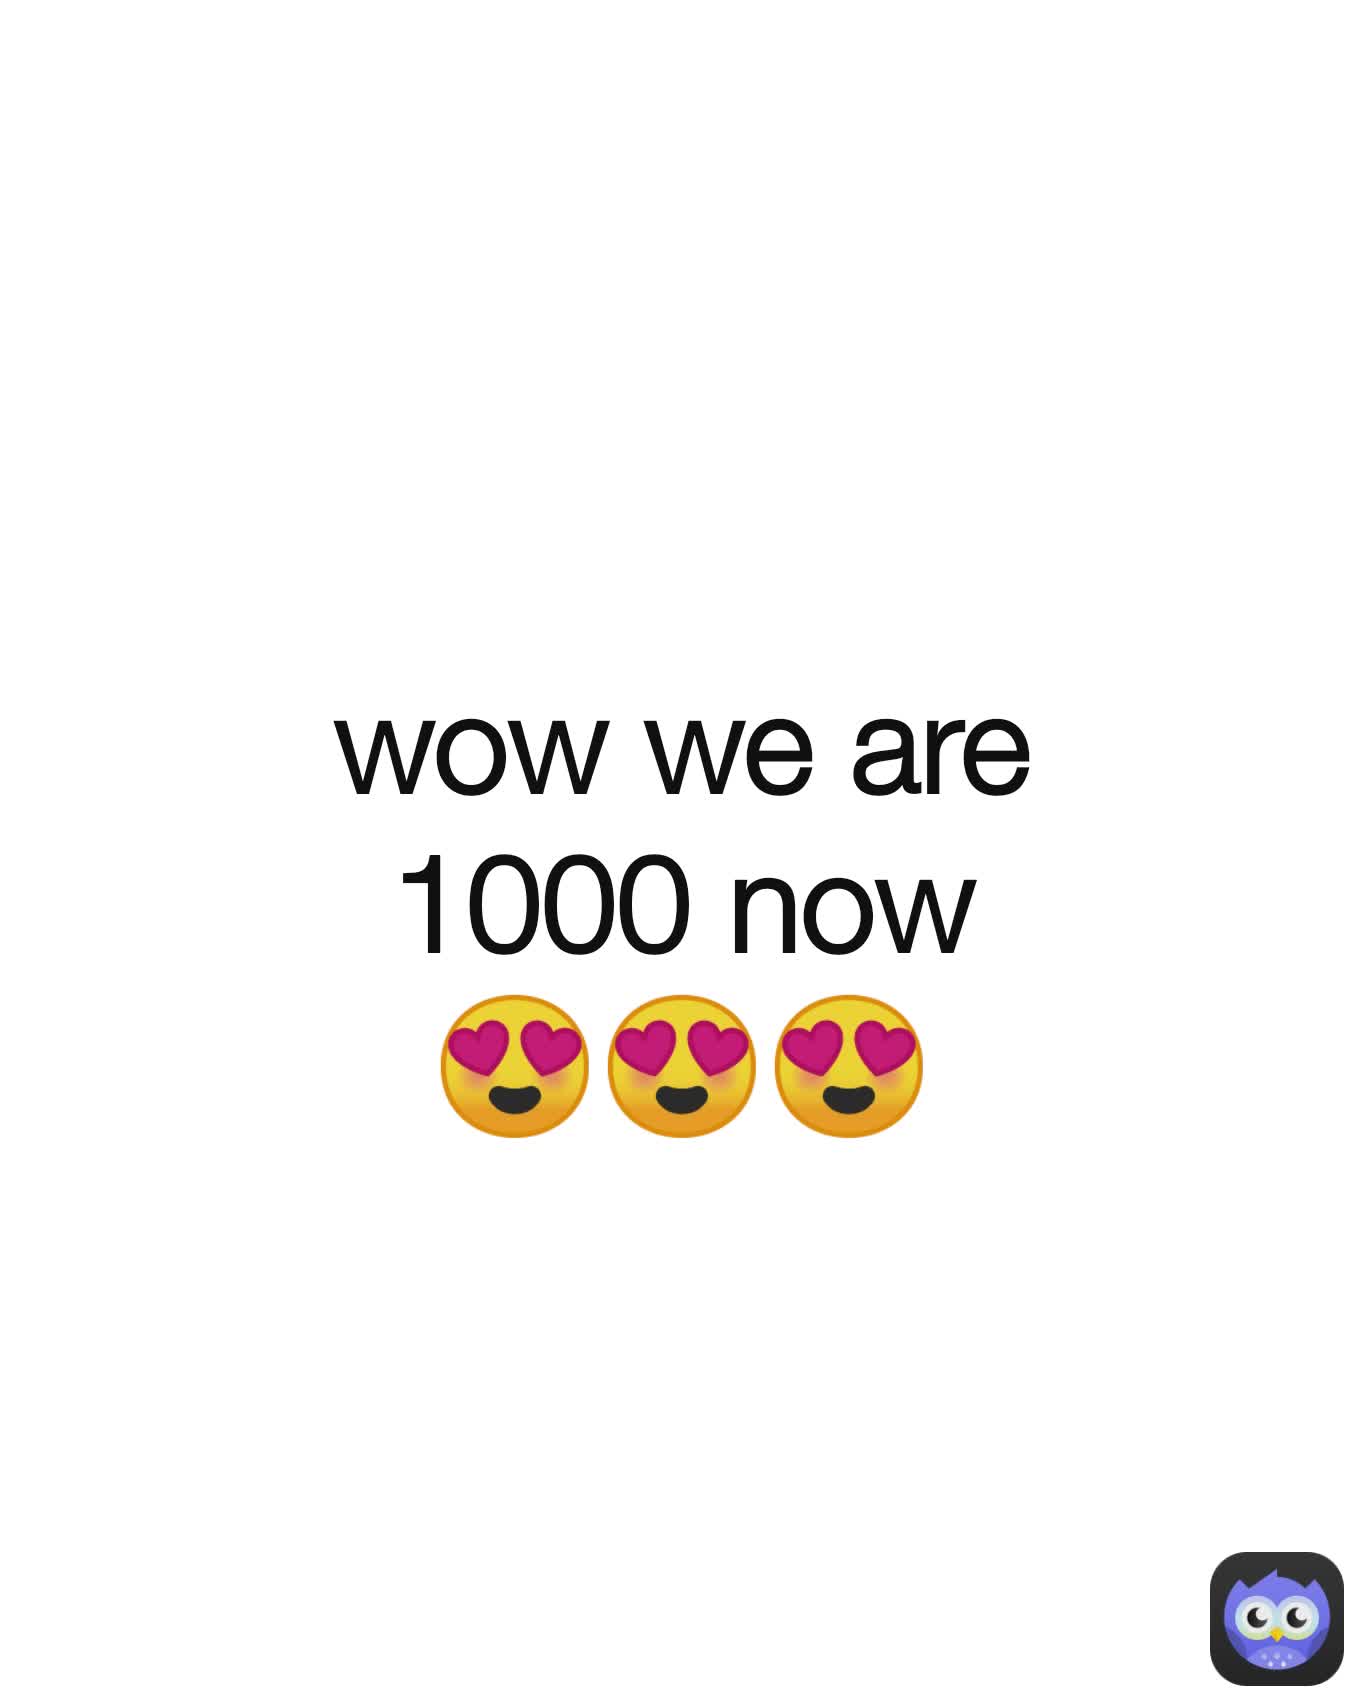 wow we are 1000 now
😍😍😍